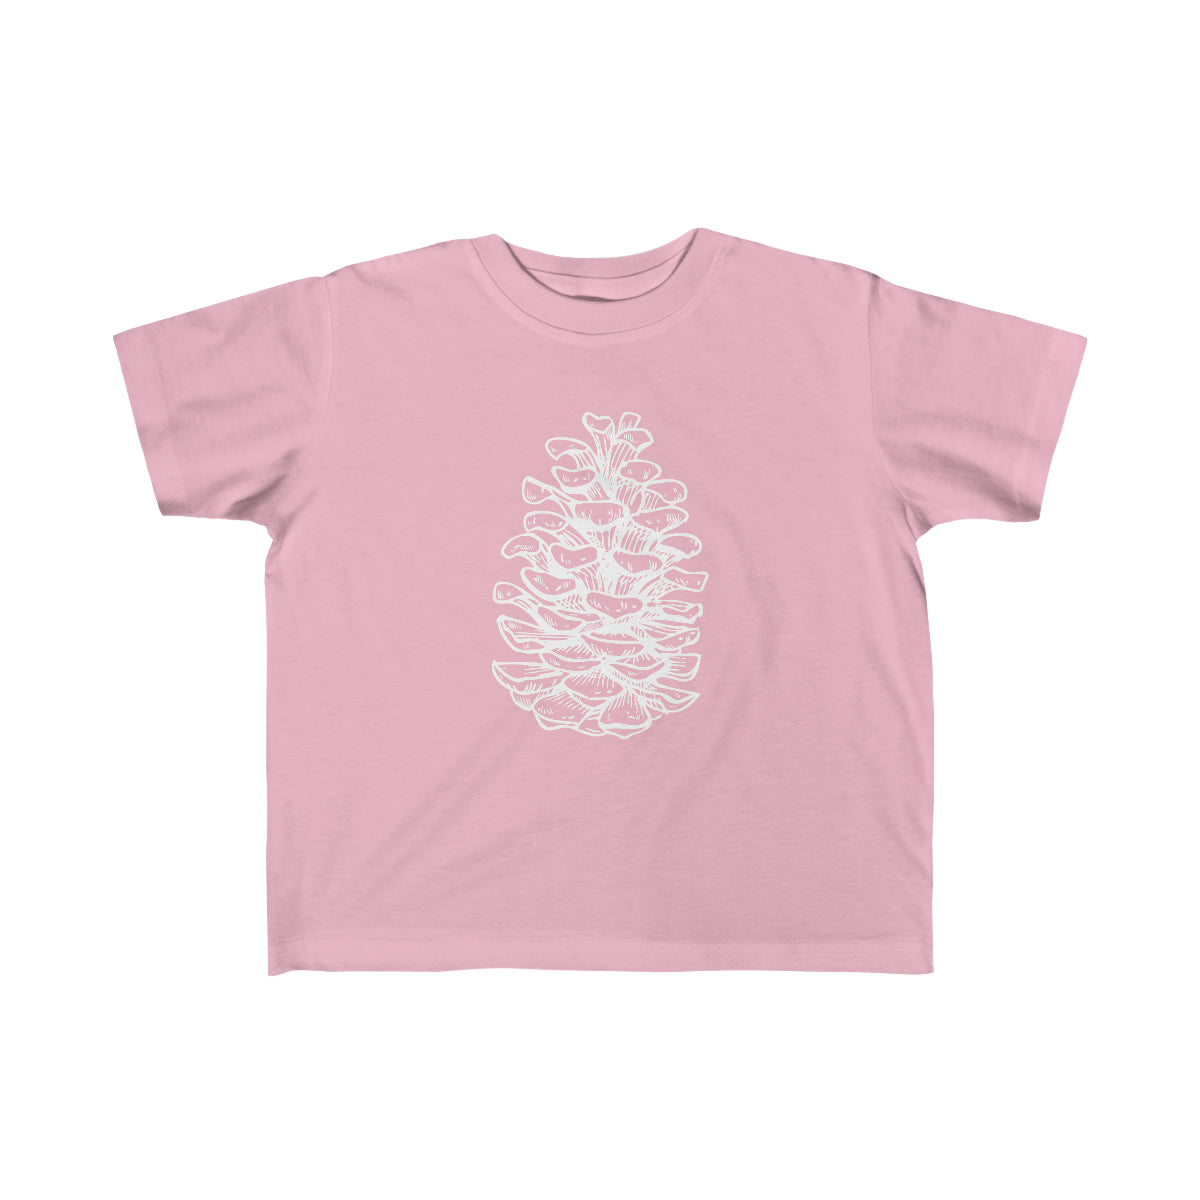 Pinecone Toddler Tee Pink / 2T - The Northwest Store